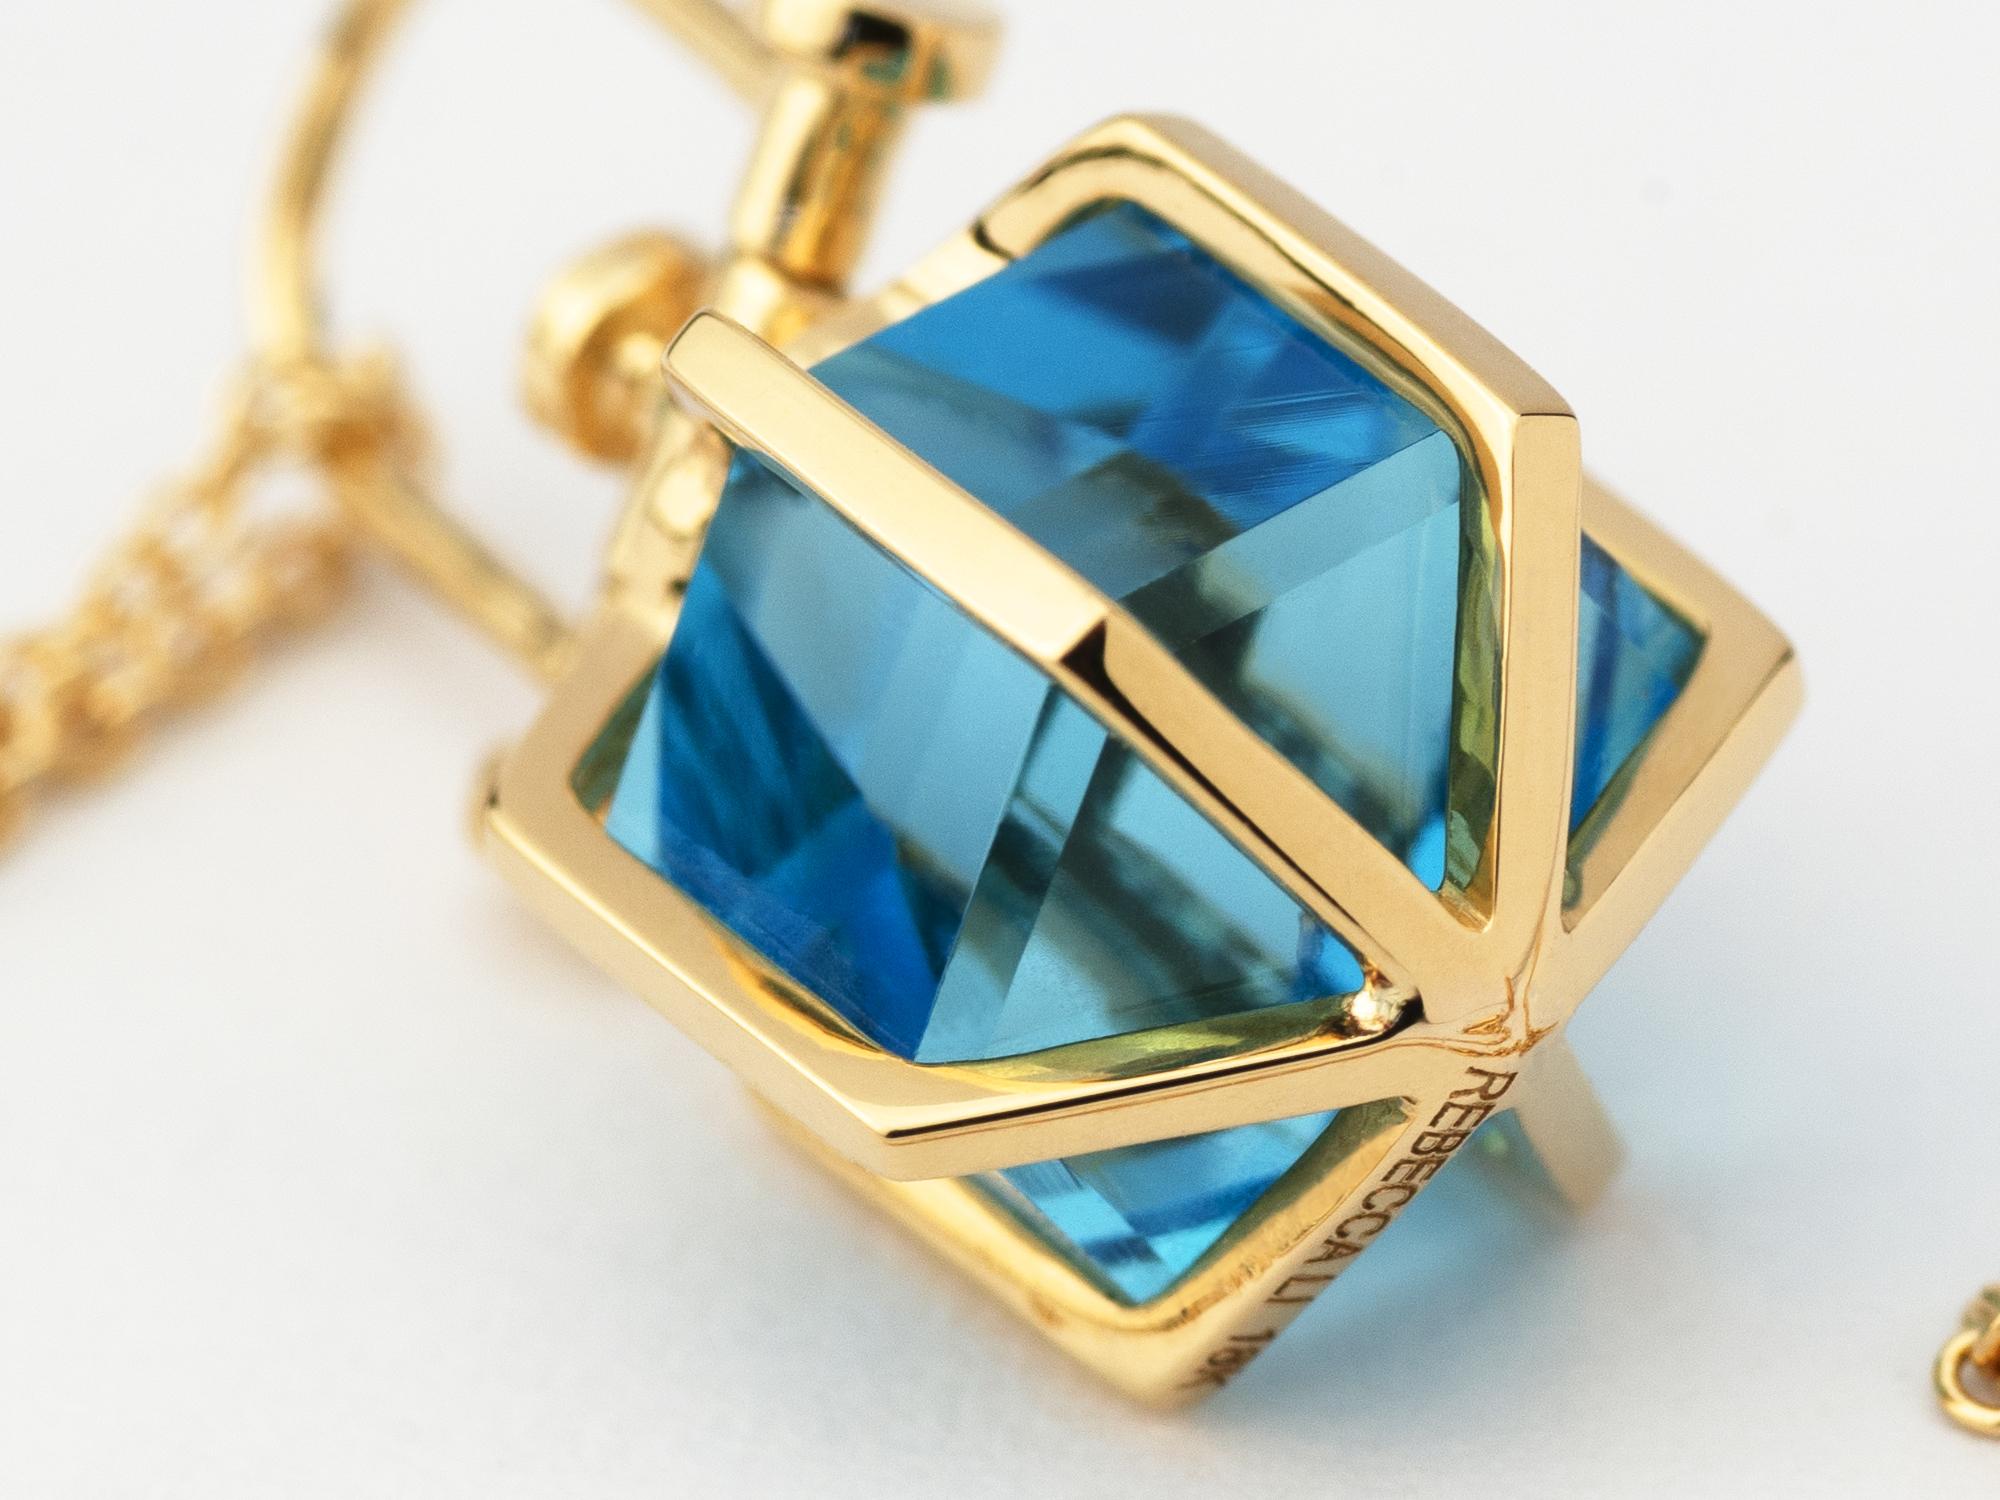 Hexagon Cut Modern Sacred 18k Solid Yellow Gold Talisman Pendant Necklace with Blue Topaz For Sale